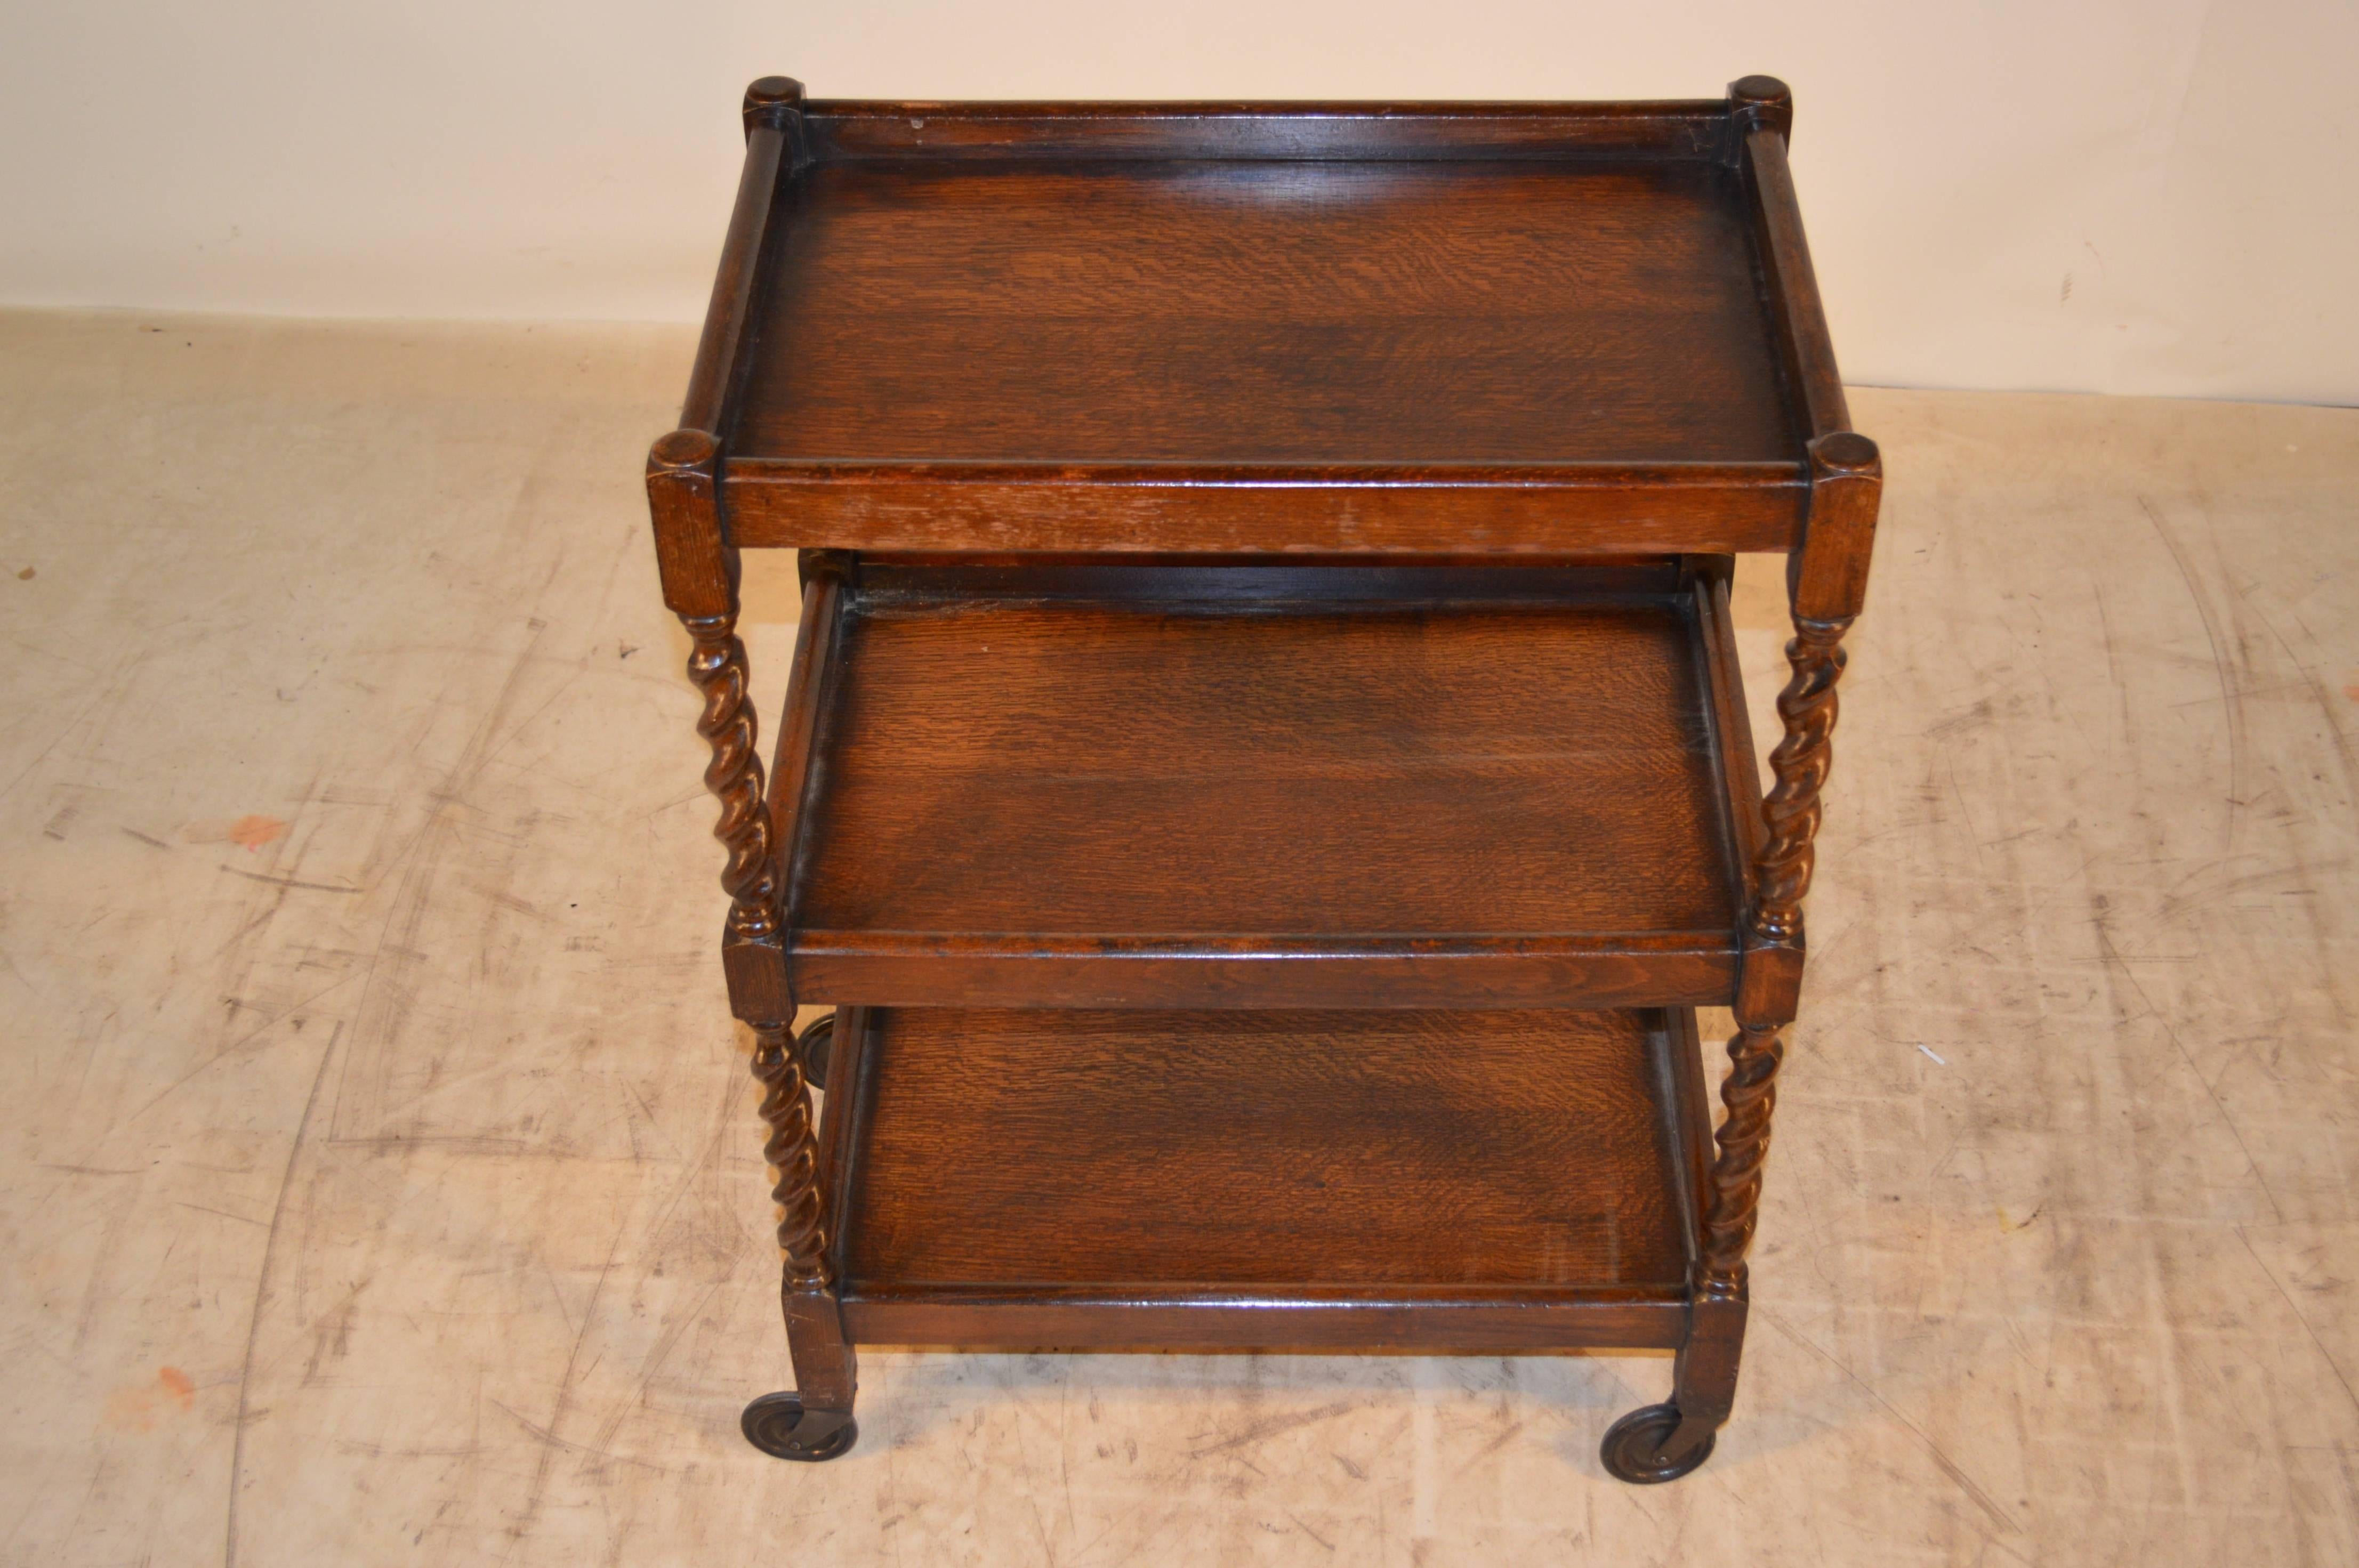 Circa 1900 English oak drinks cart with three shelves, which have galleries and barley twist shelf supports.